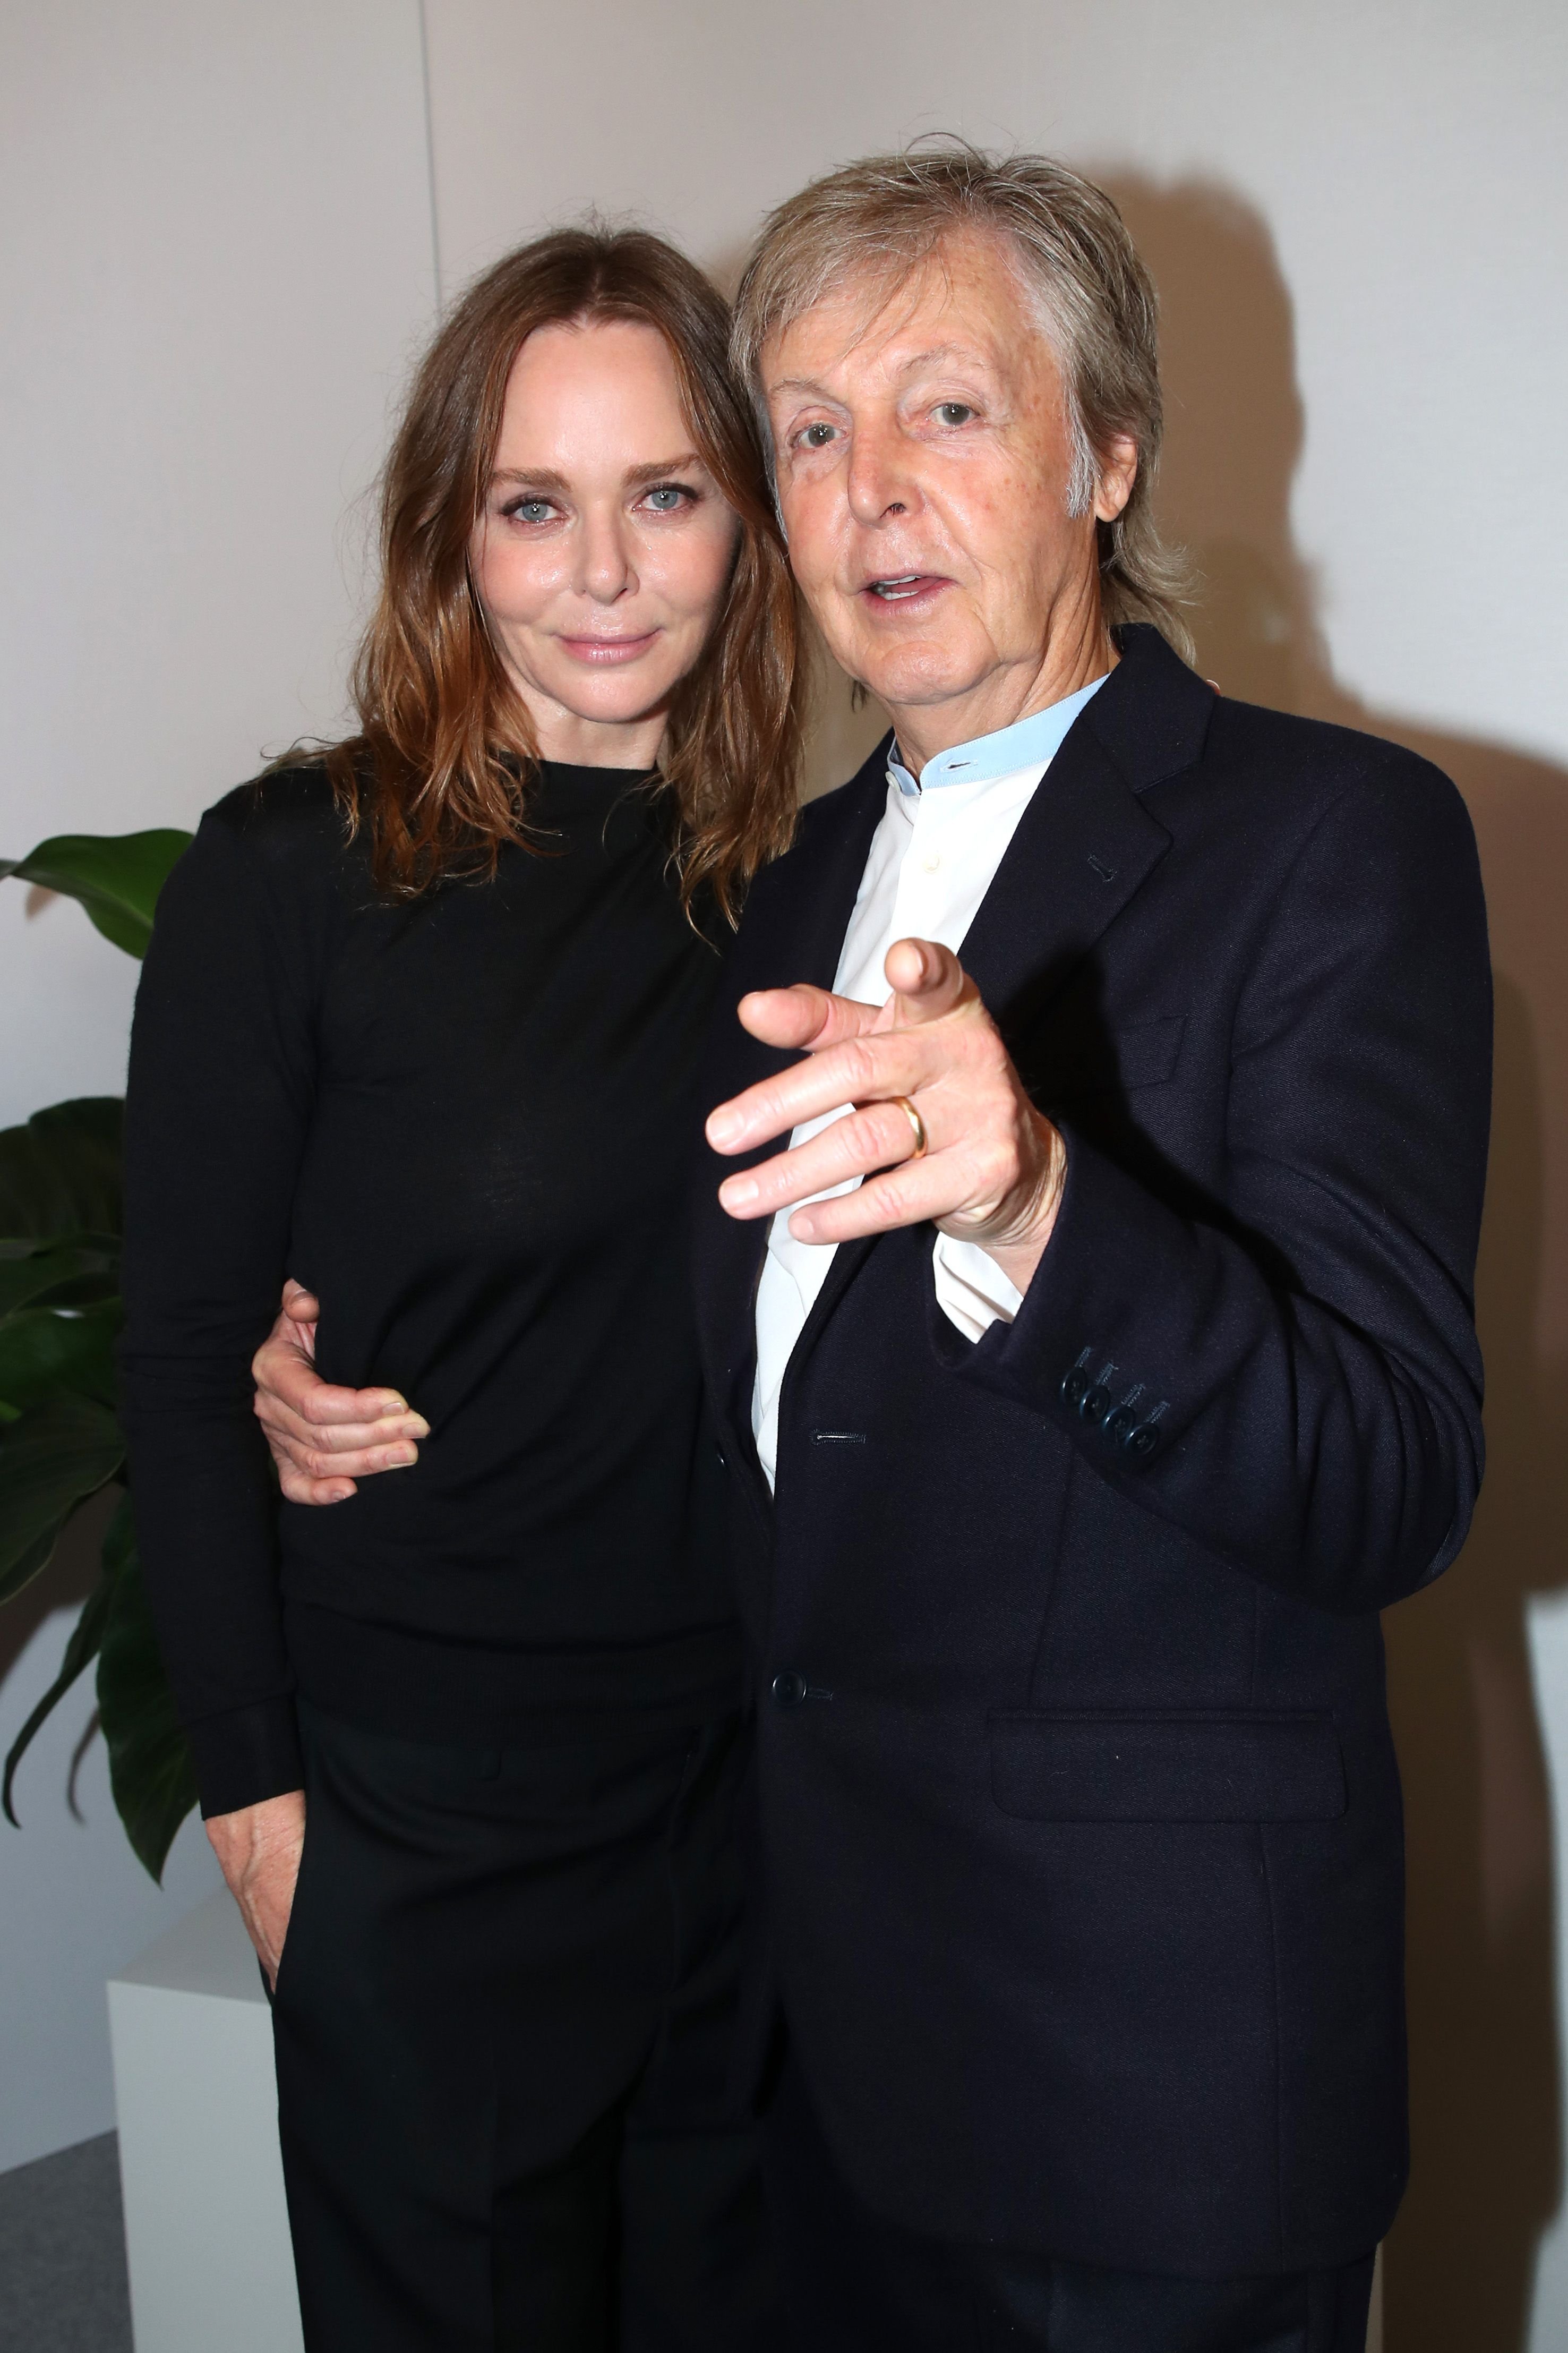 Stylist Stella McCartney and her father Paul McCartney pose after the Stella McCartney Womenswear Spring/Summer 2020 show as part of Paris Fashion Week on September 30, 2019 in Paris, France. | Source: Getty Images